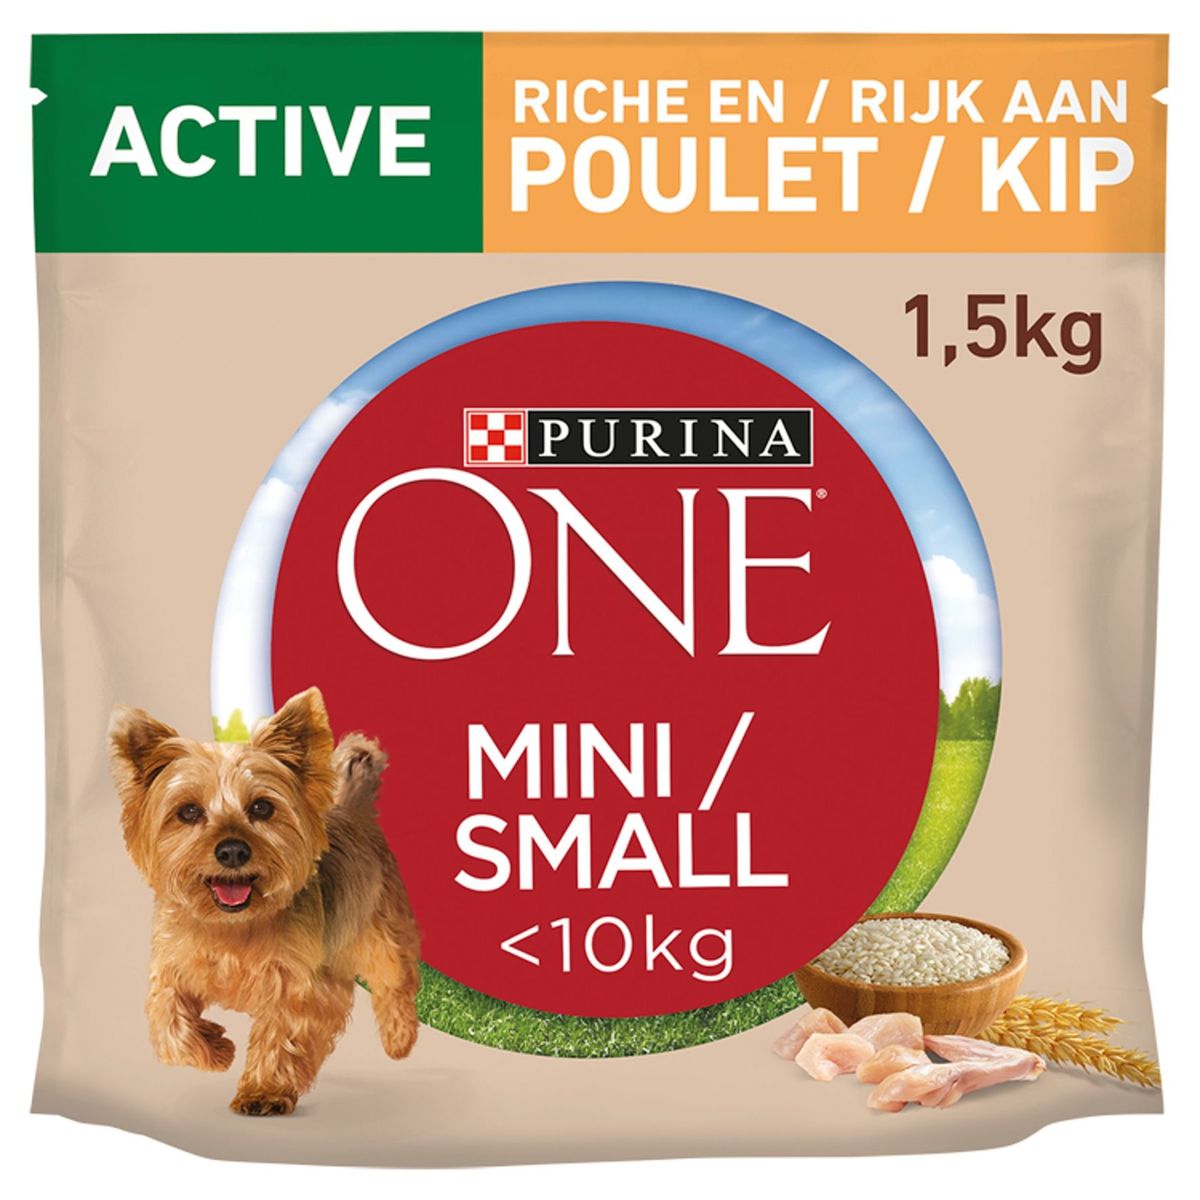 Purina One Mini / Small <10 kg Active 1.5 kg